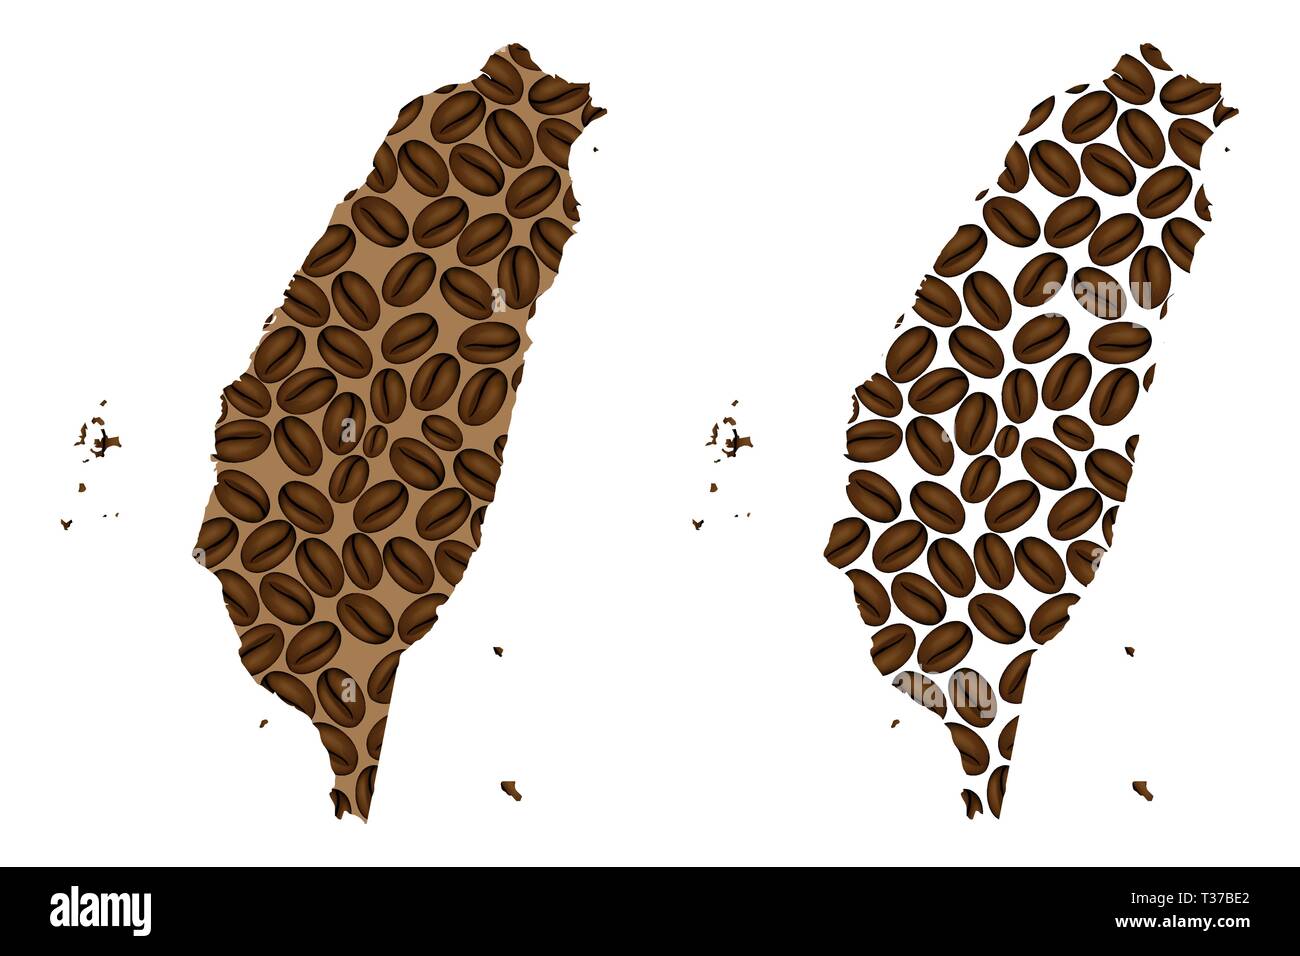 Taiwan -  map of coffee bean, Republic of China (ROC) map made of coffee beans, Stock Vector